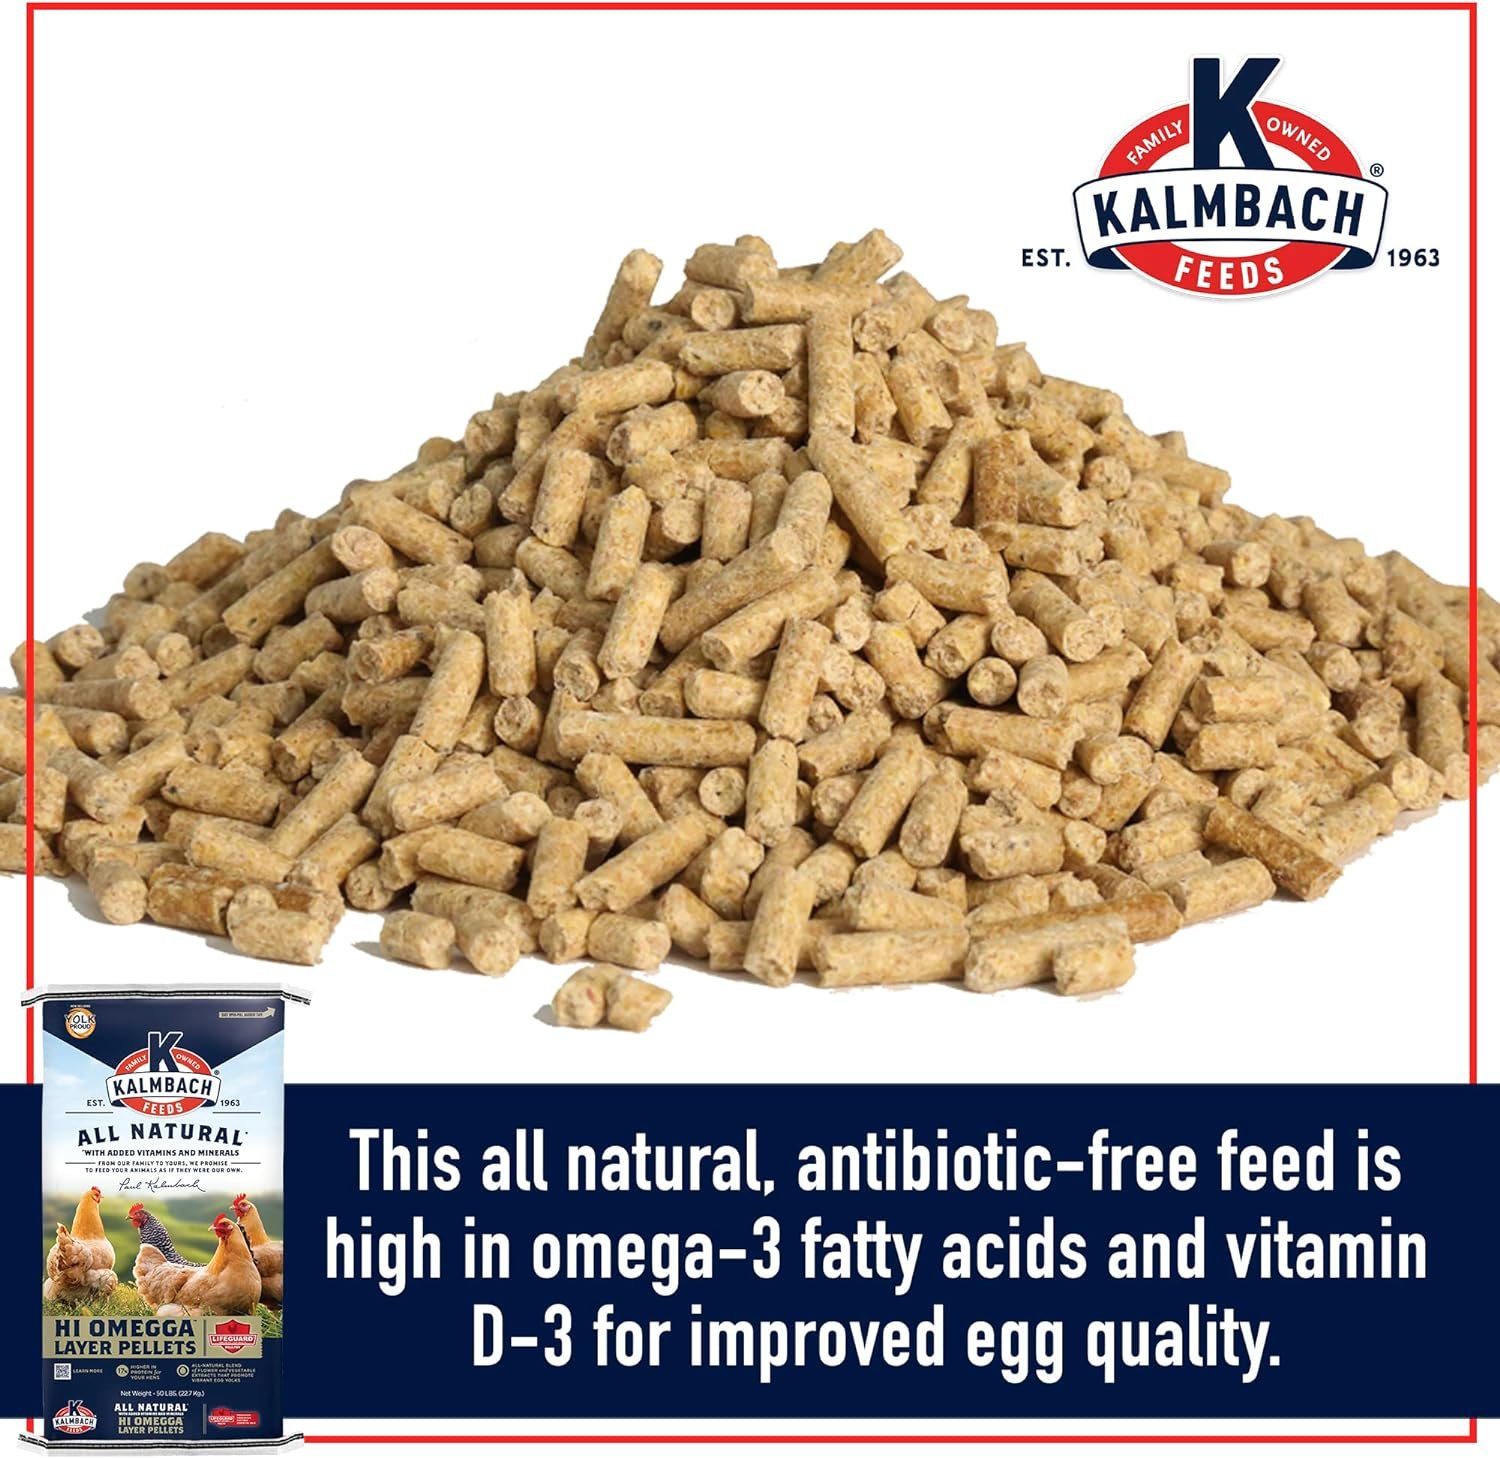 Kalmbach Feeds Hi Omegga All Natural 17% Layer Pellets for Chickens, 50 lb